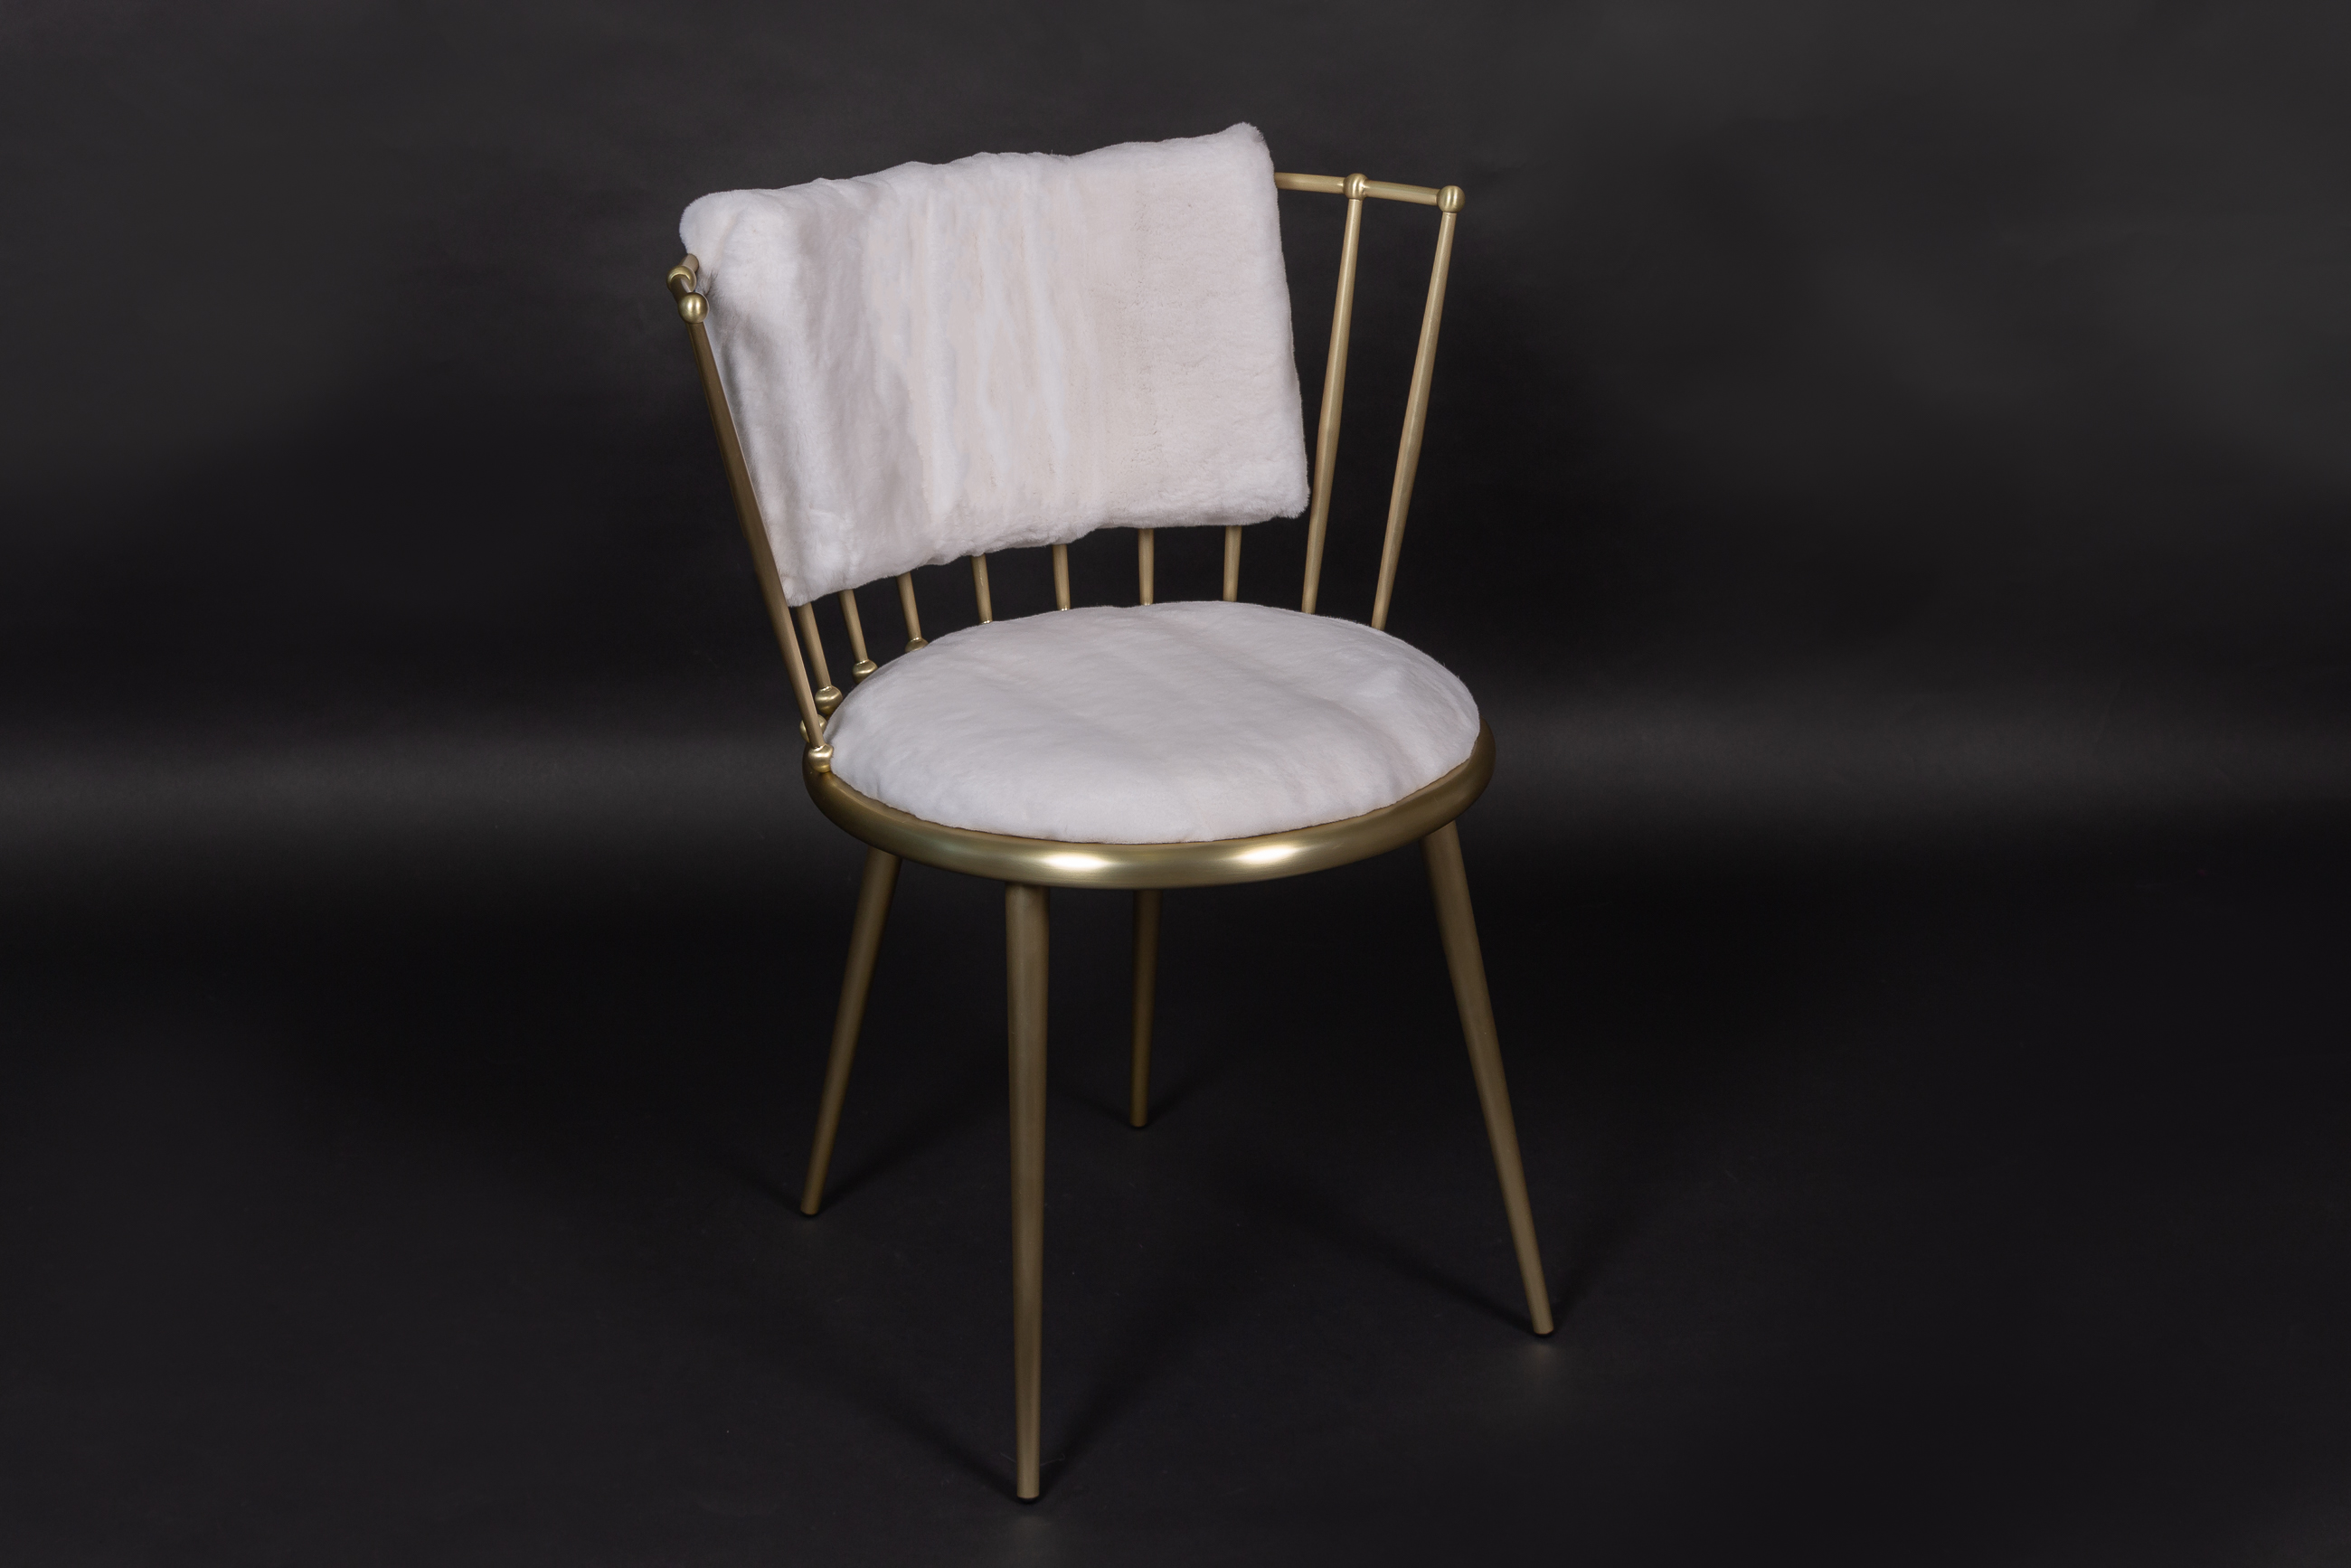 Chair with Plucked White Mink